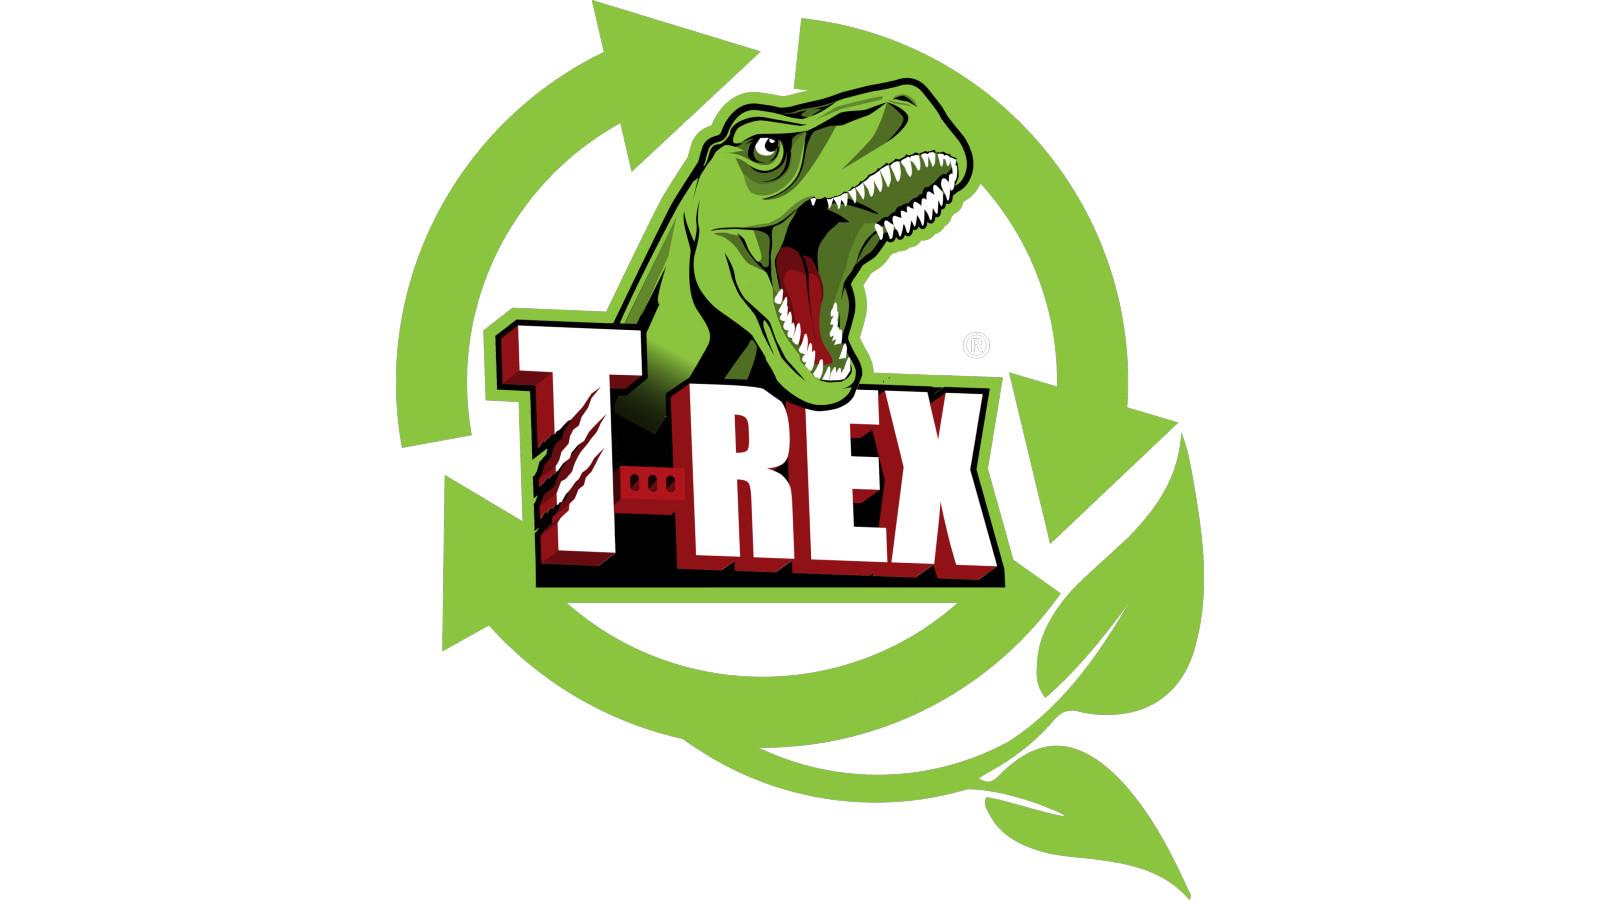 T-Rex is back and this time it’s… Green image